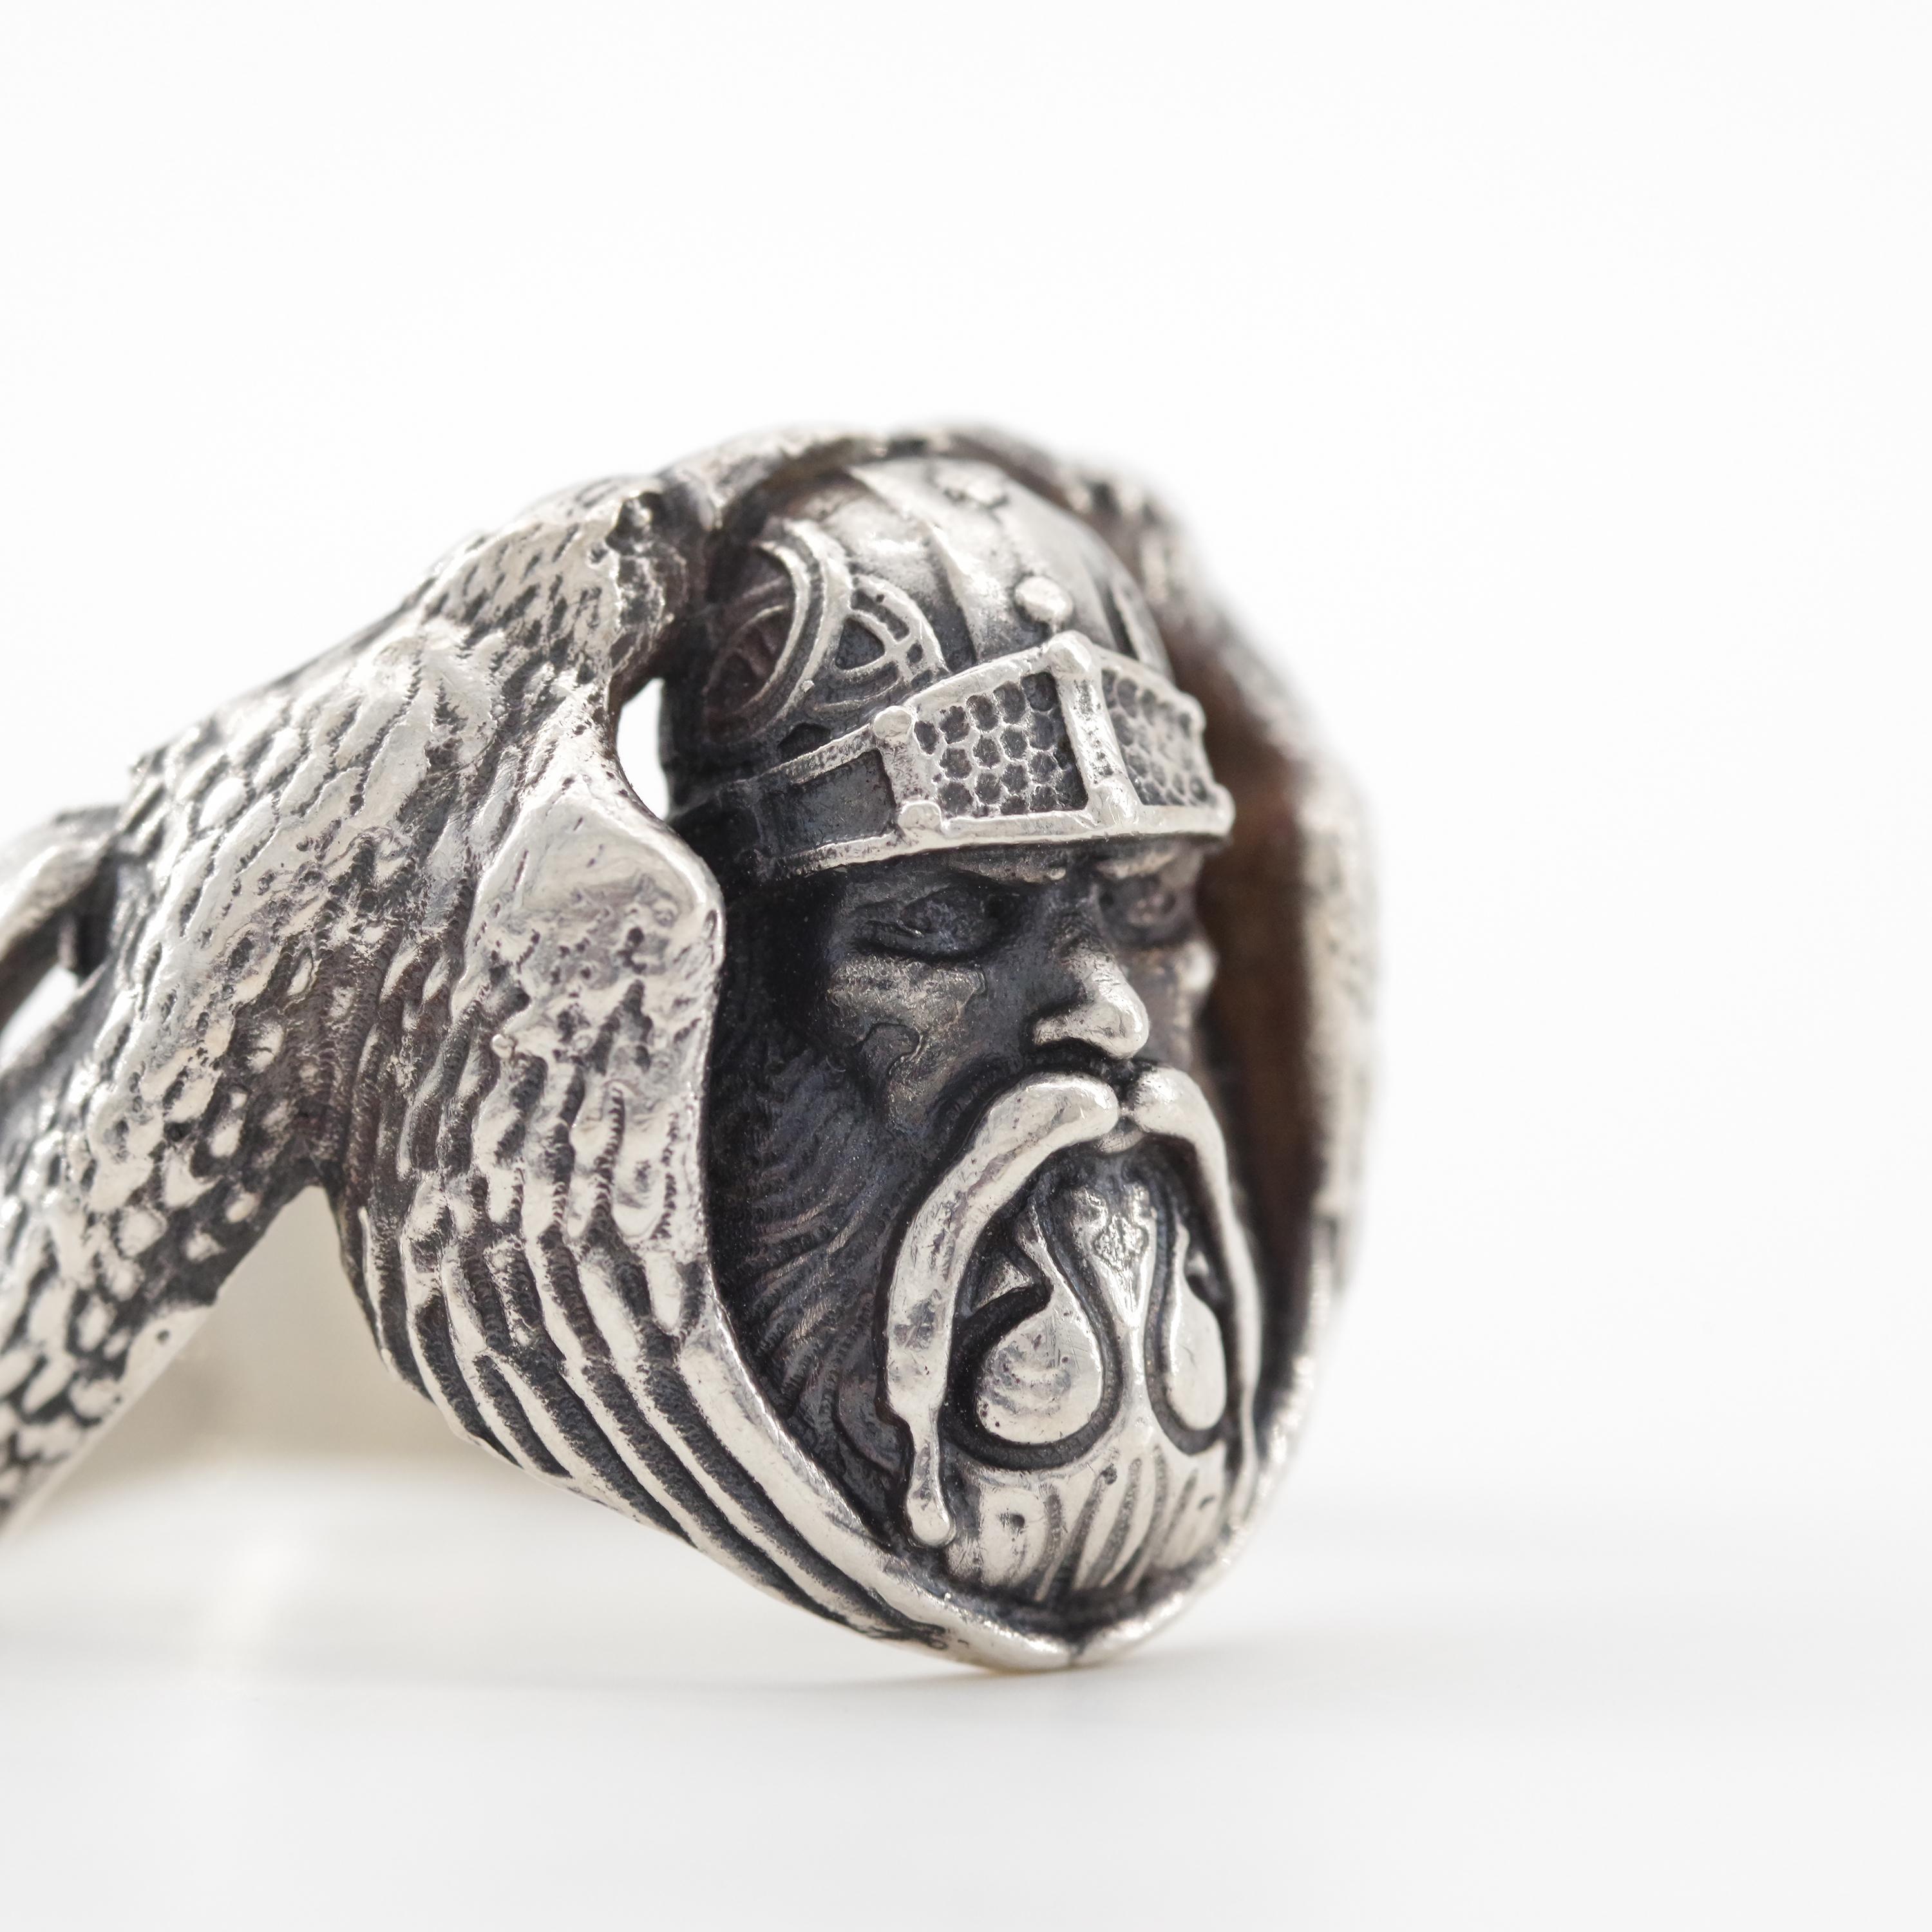 Women's or Men's Figural Ring Depicting Odin the Norse God circa 1930 is Beyond Rare